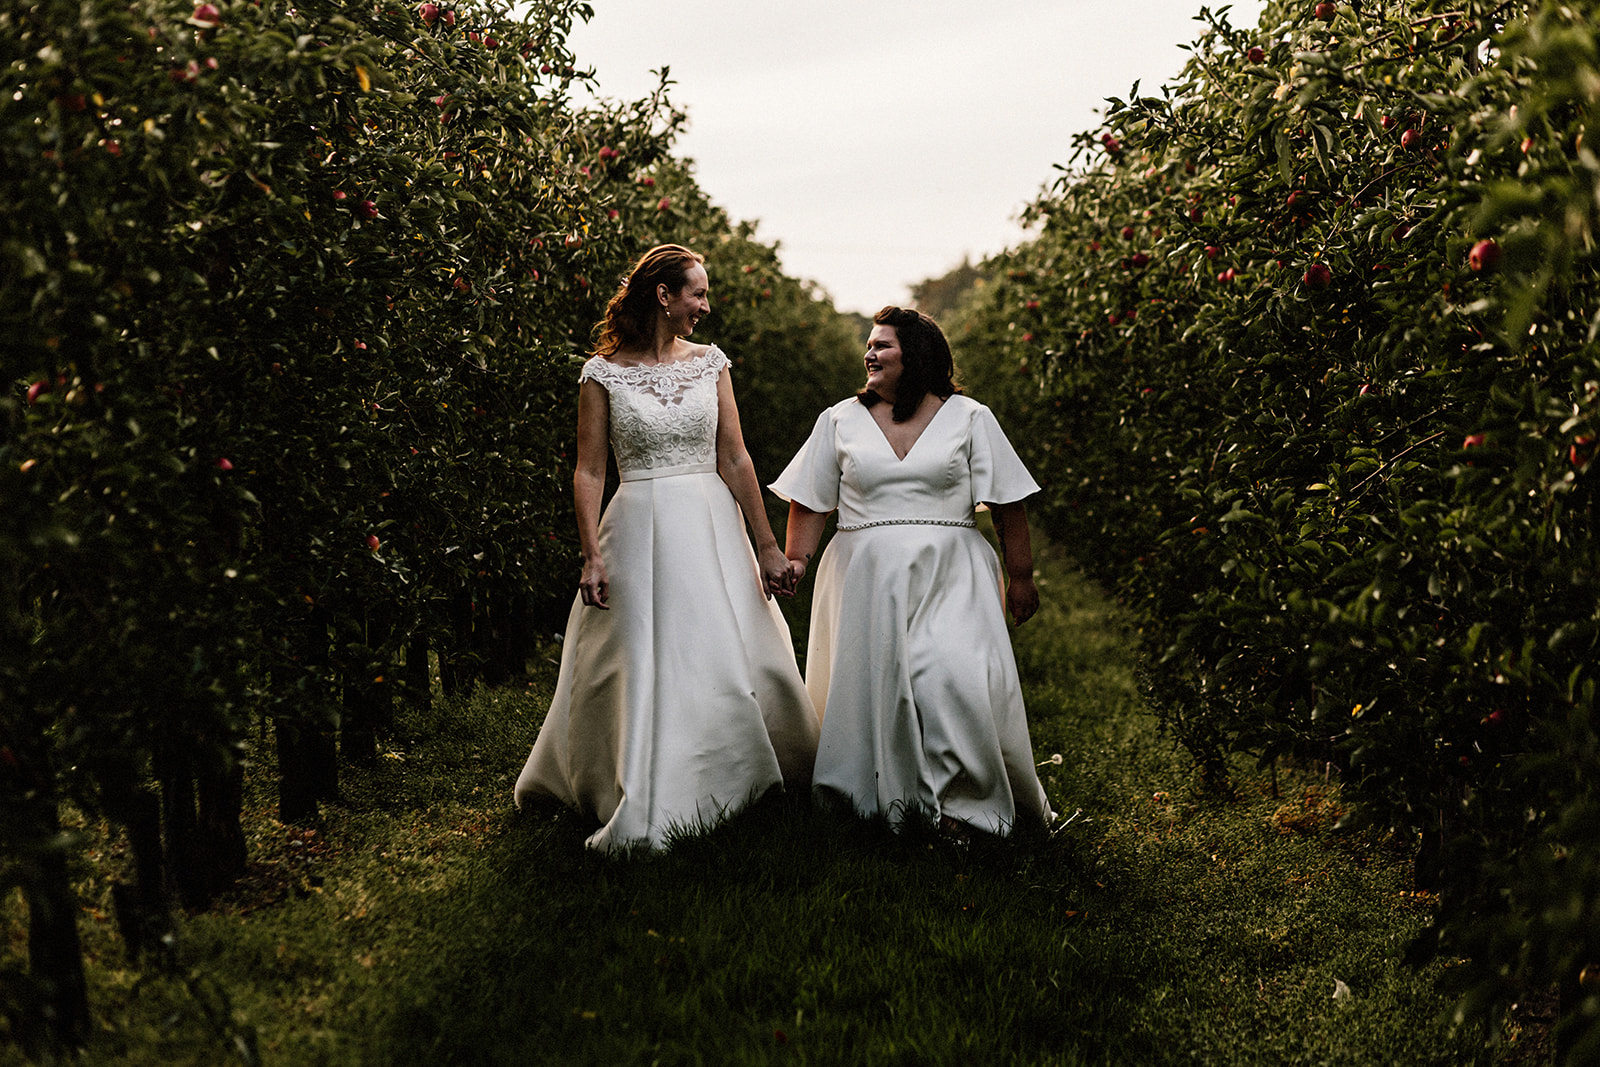 Couple portrait of two brides walking in a apple orchard looking at each other and smiling.